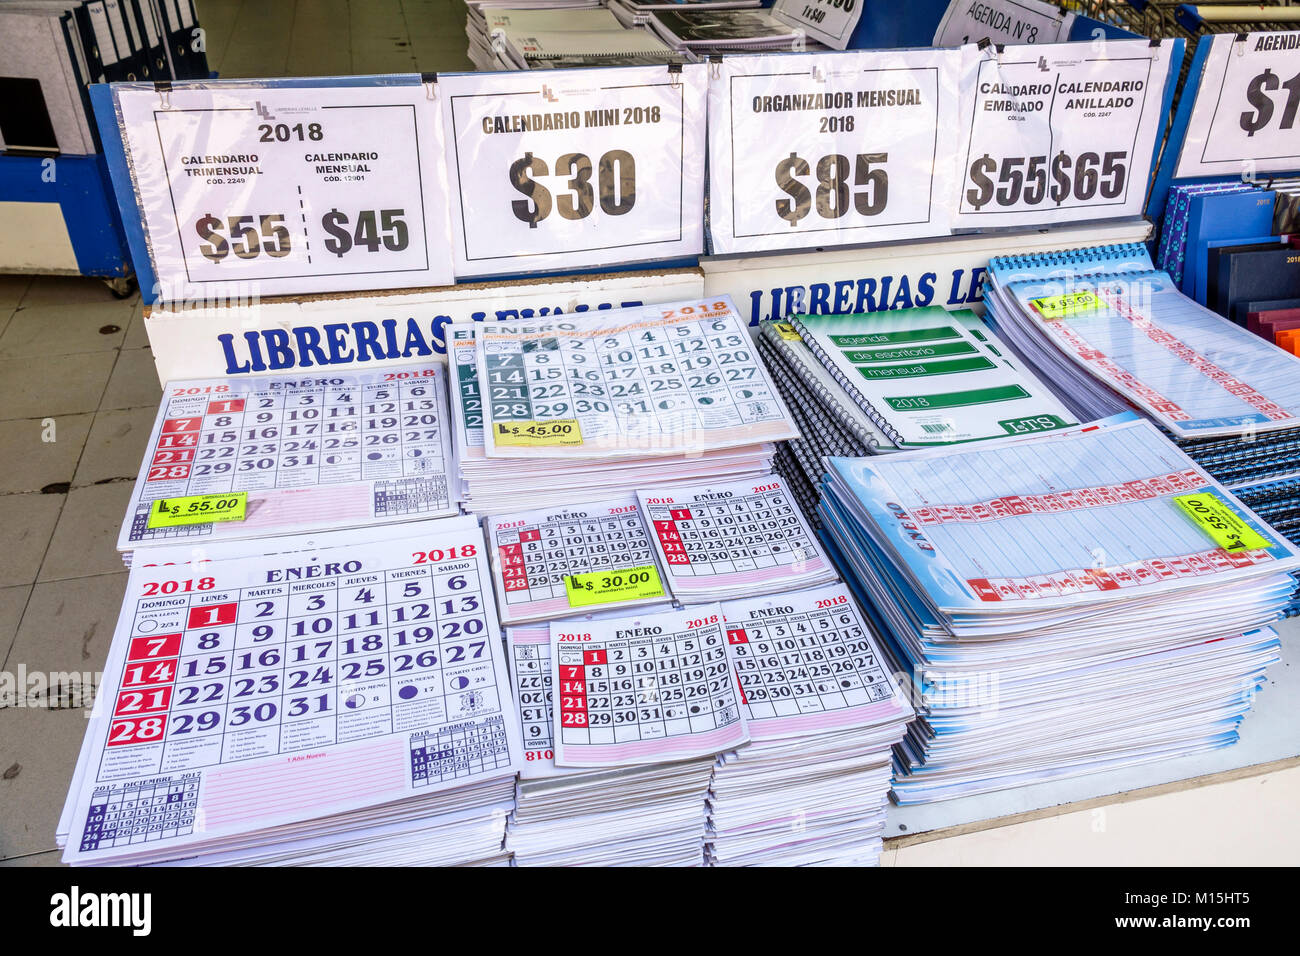 Buenos Aires Argentina,stationery store,calendars,2018,Spanish,language,monthly organizers,price,ARG171122348 Stock Photo